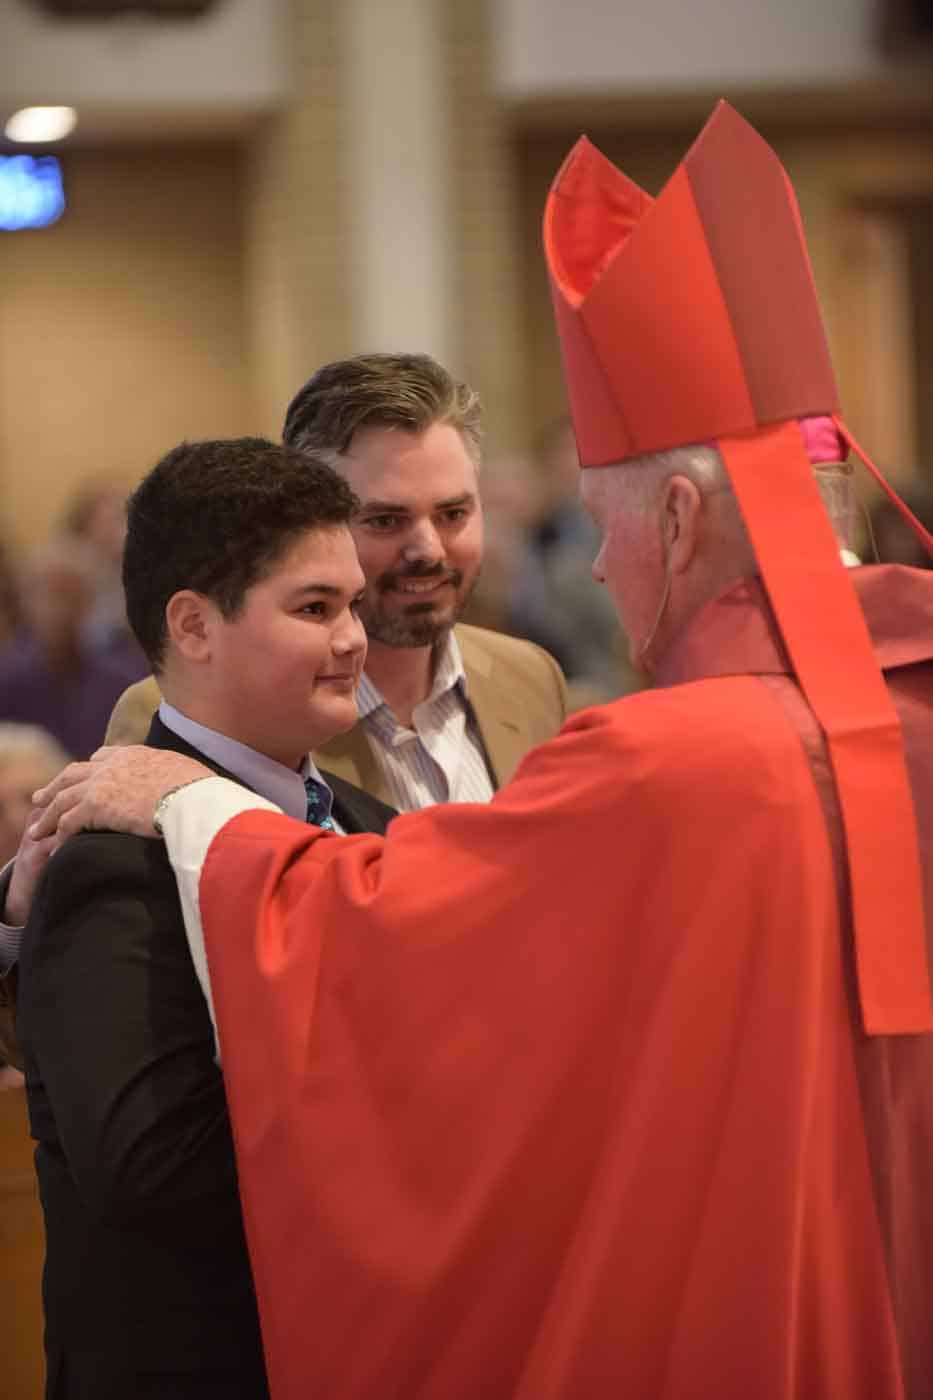 Young man, father and priest Confirmation photo